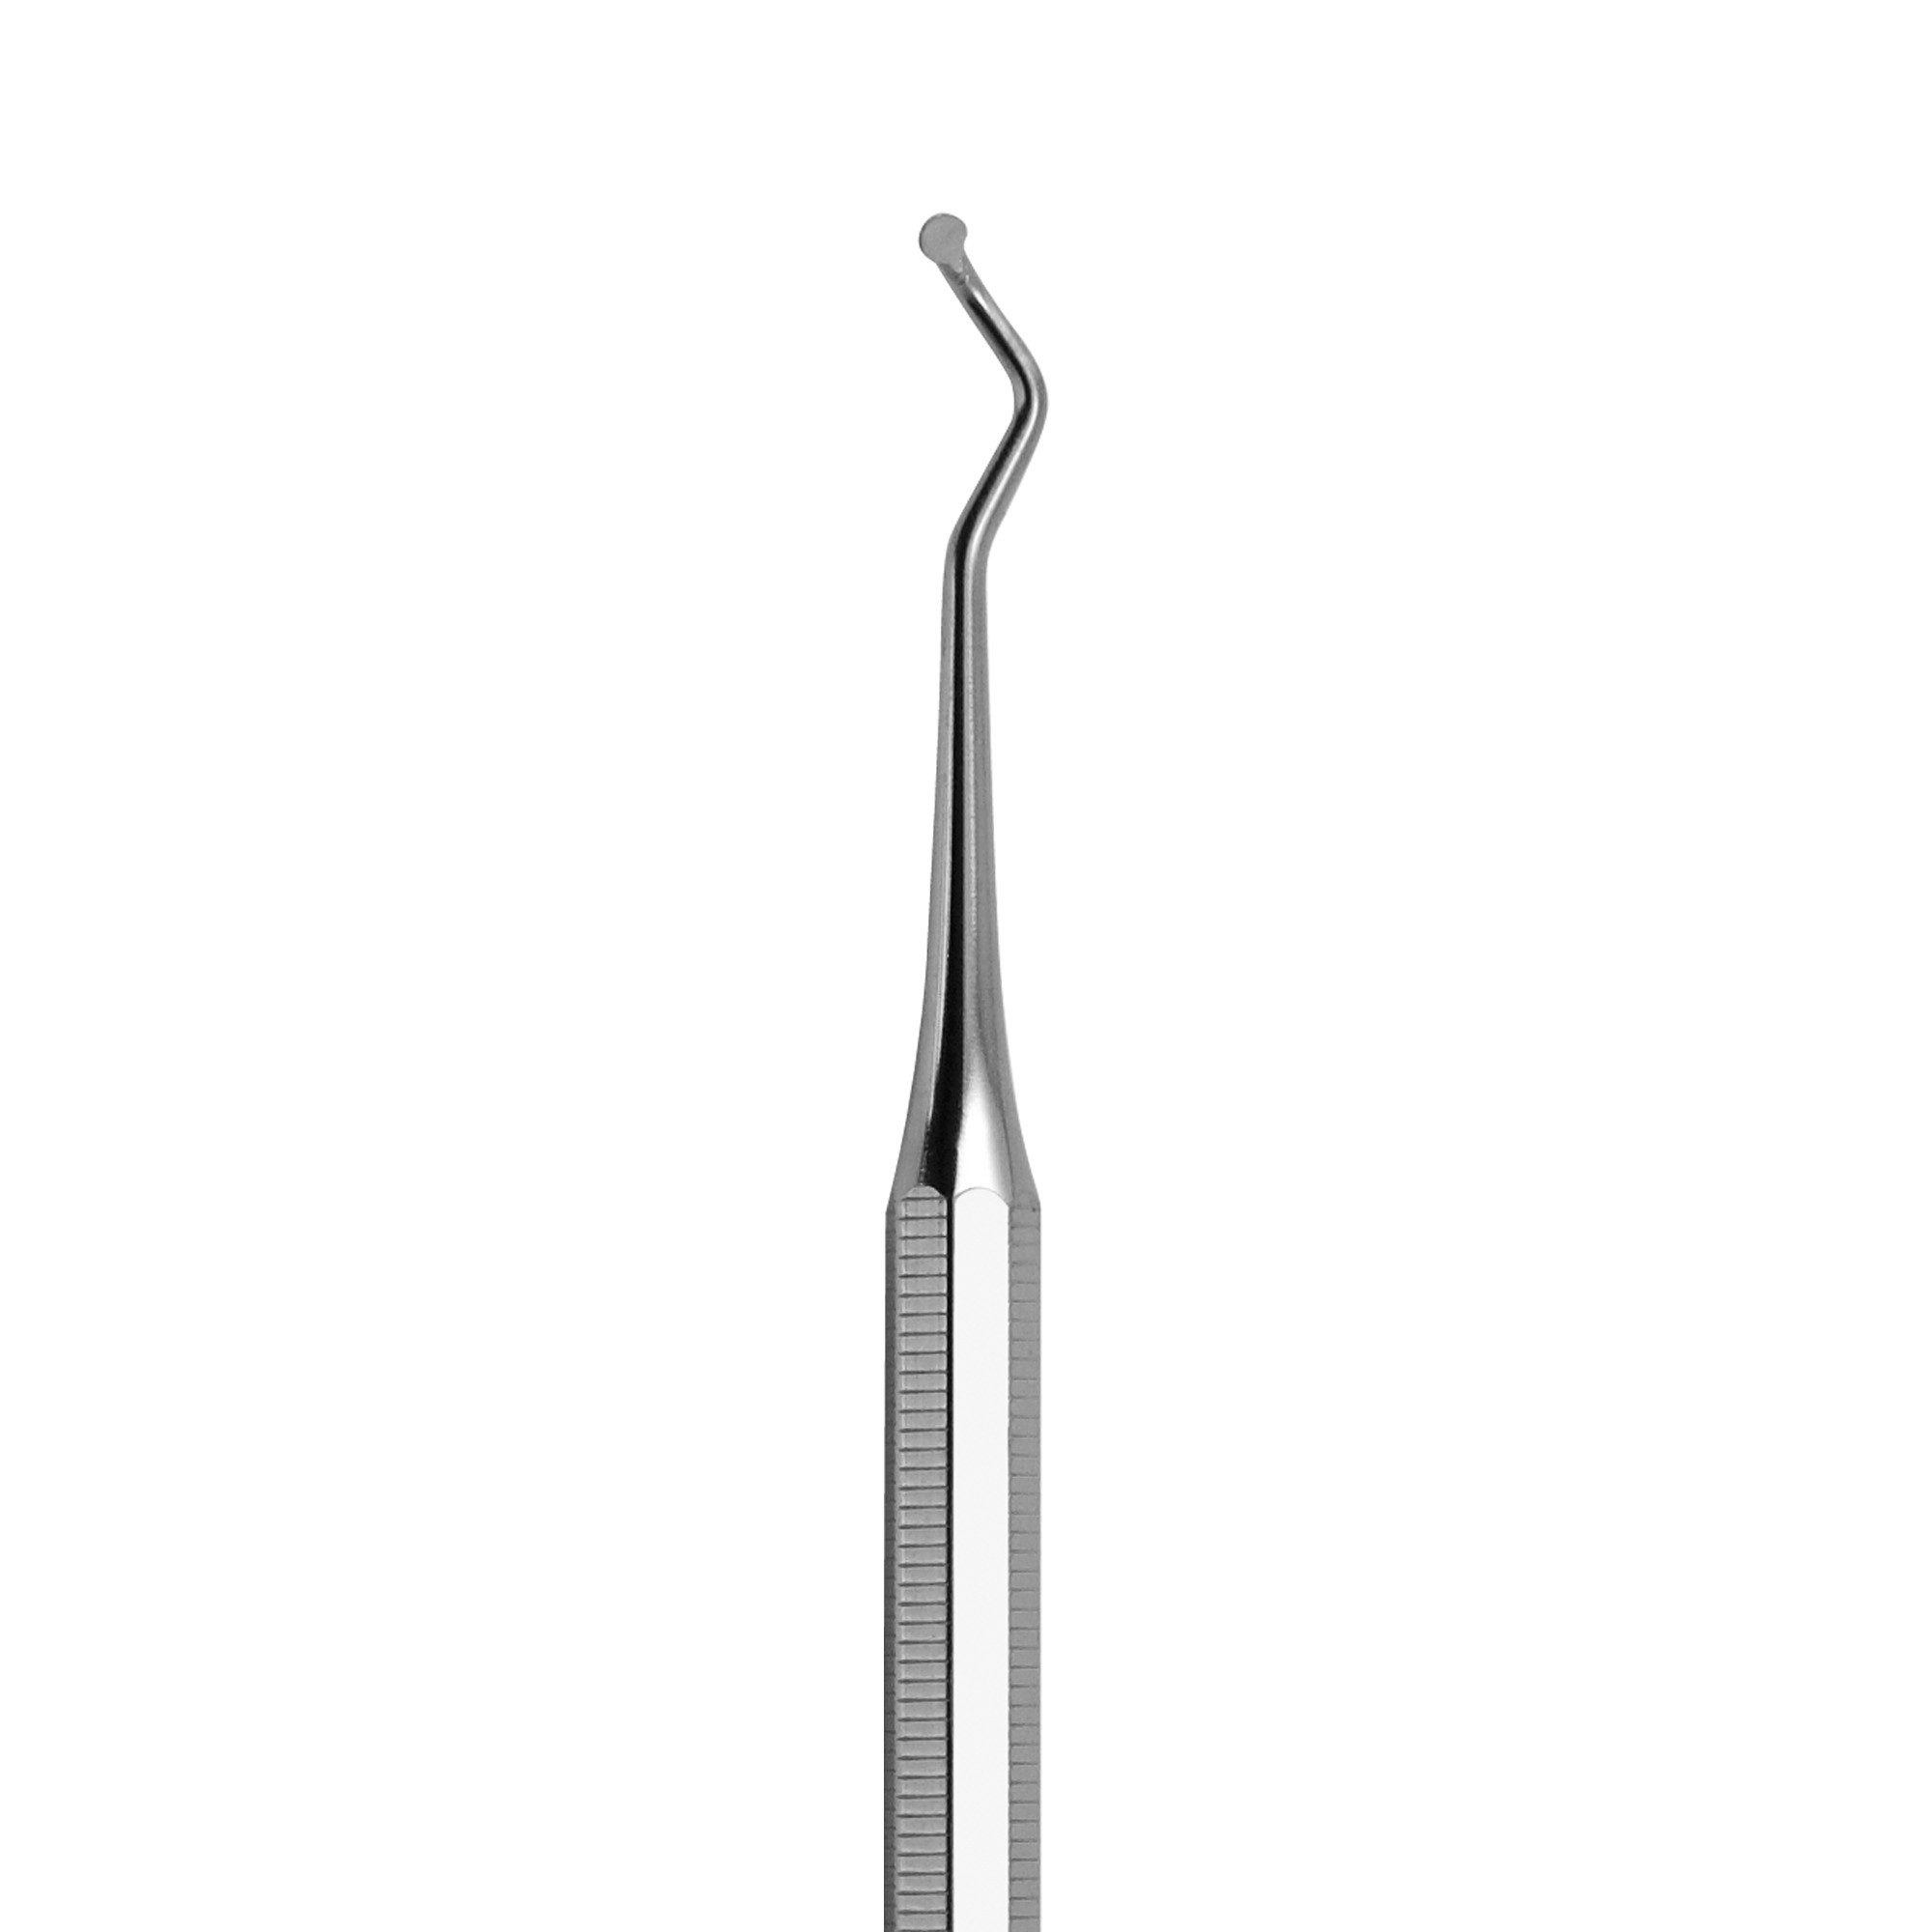 Professional stainless steel curette with angled tip